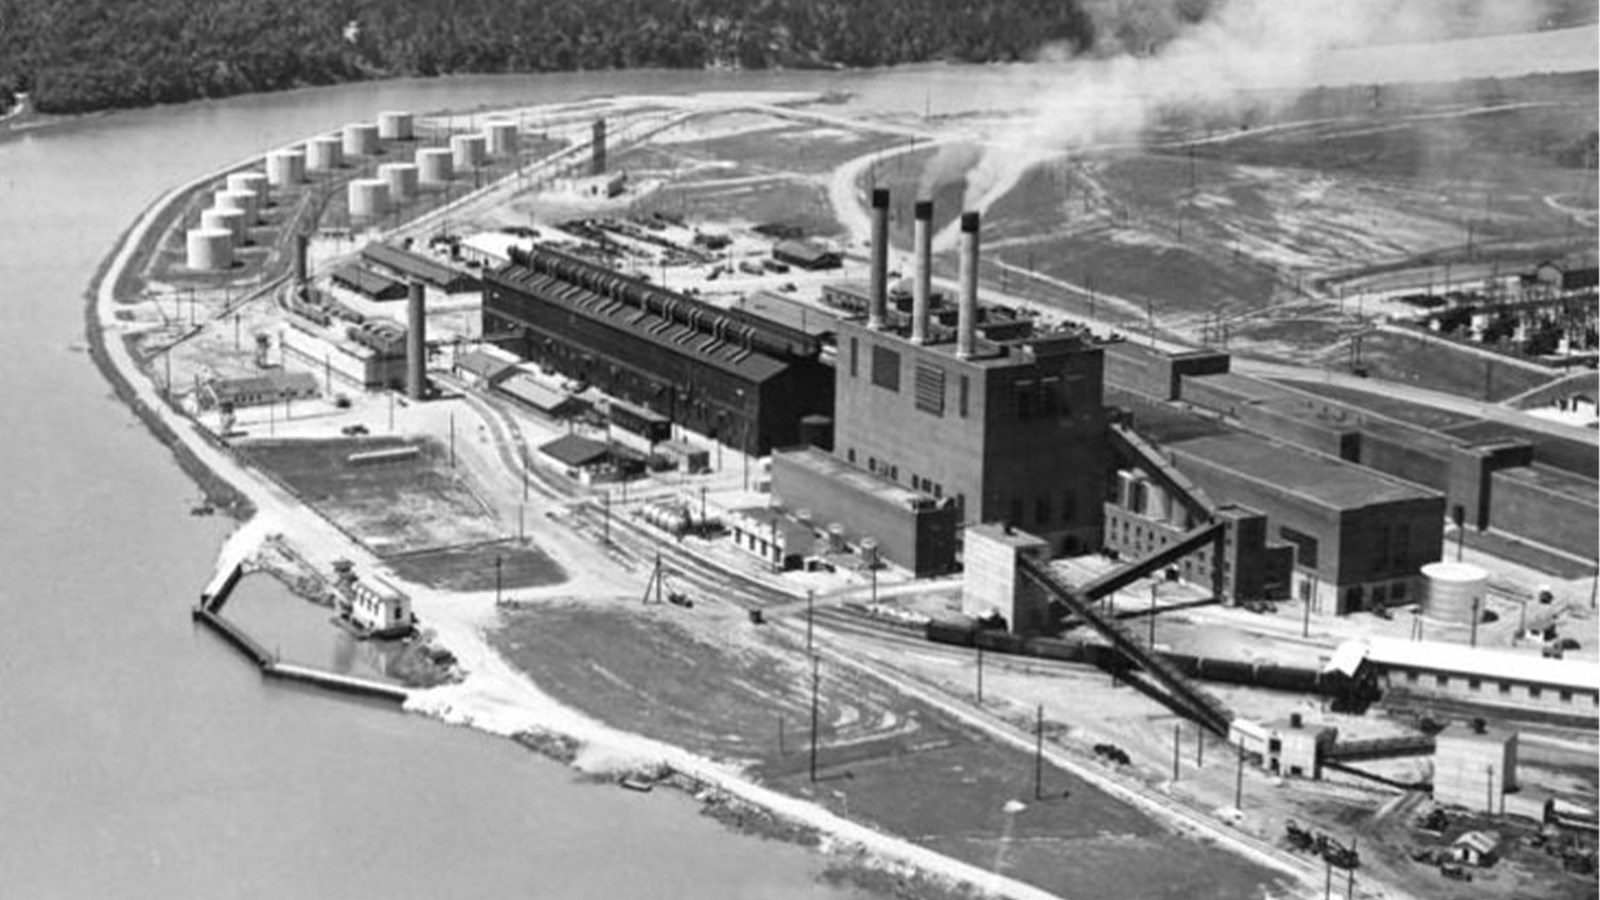 A large industrial complex with three smoking stacks rests on the bank of a winding river.